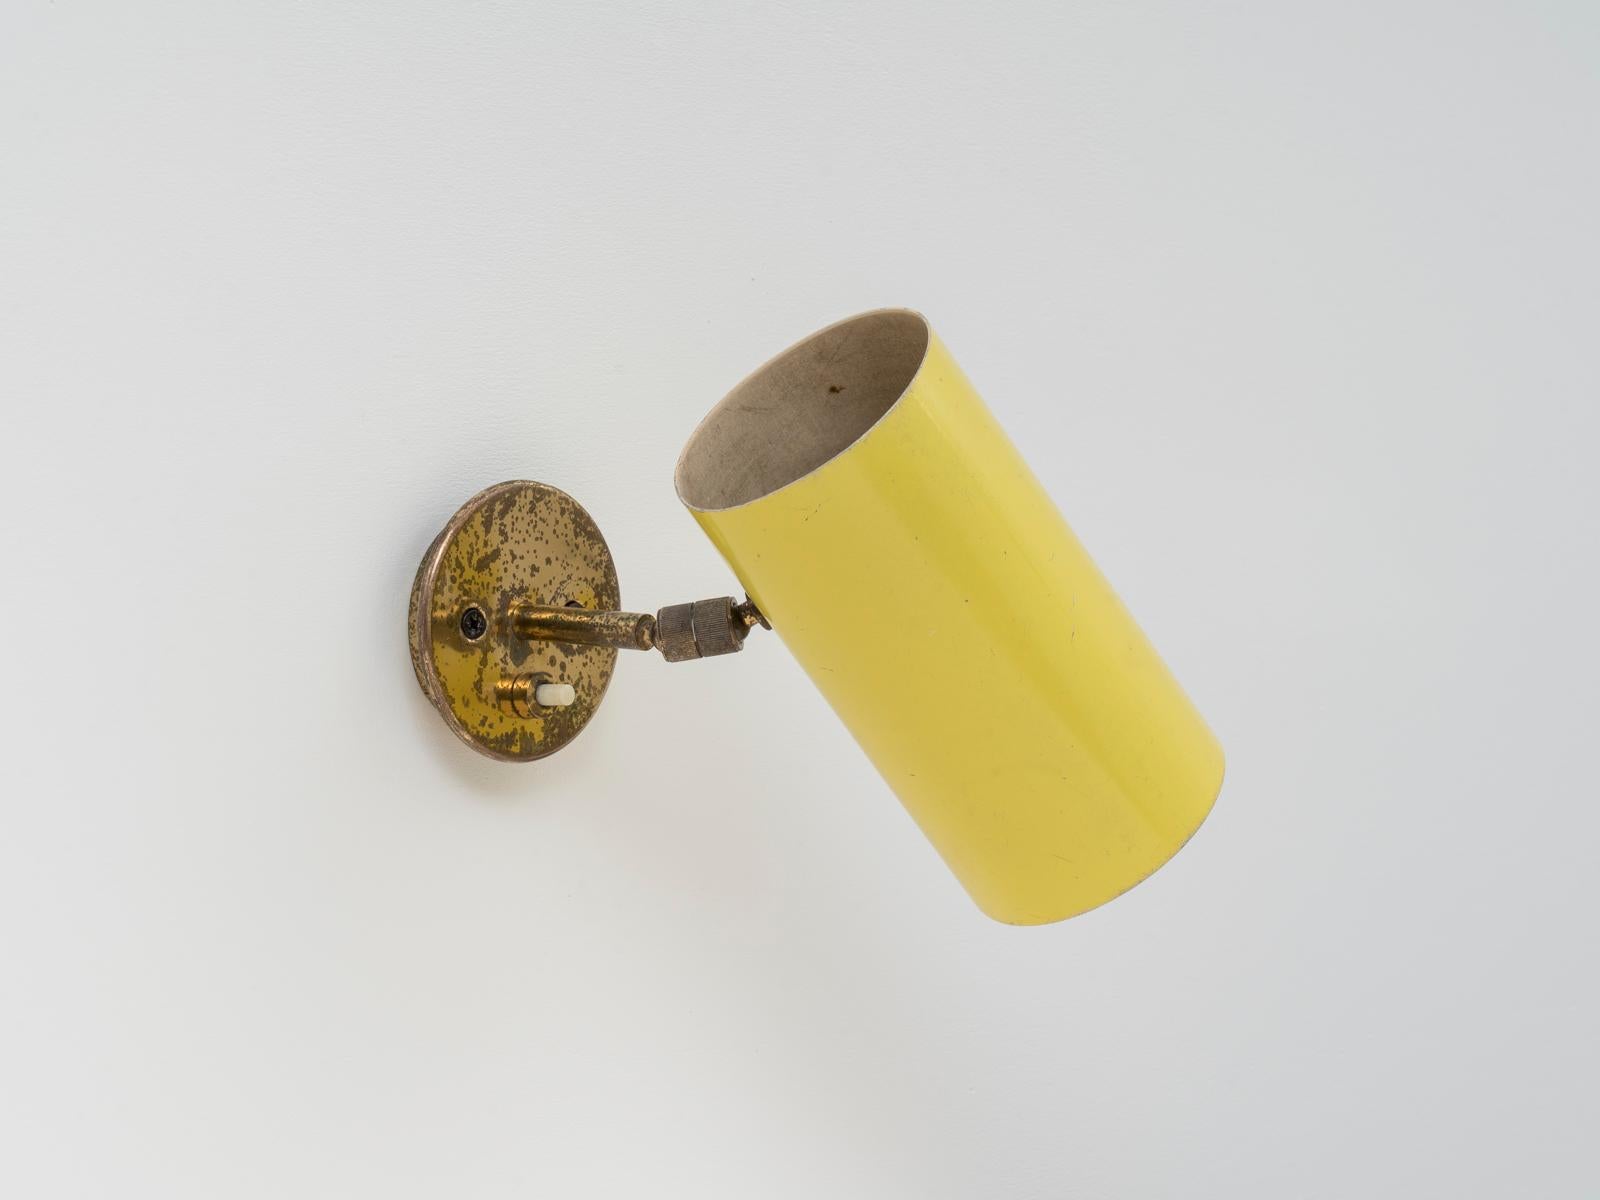 This fully directable wall light was designed by Italian lighting master Gino Sarfatti for his own company Arteluce in the 1950s. This model was mostly manufactured in black or cream white color, this yellow version is rarer. The lamp is left in its